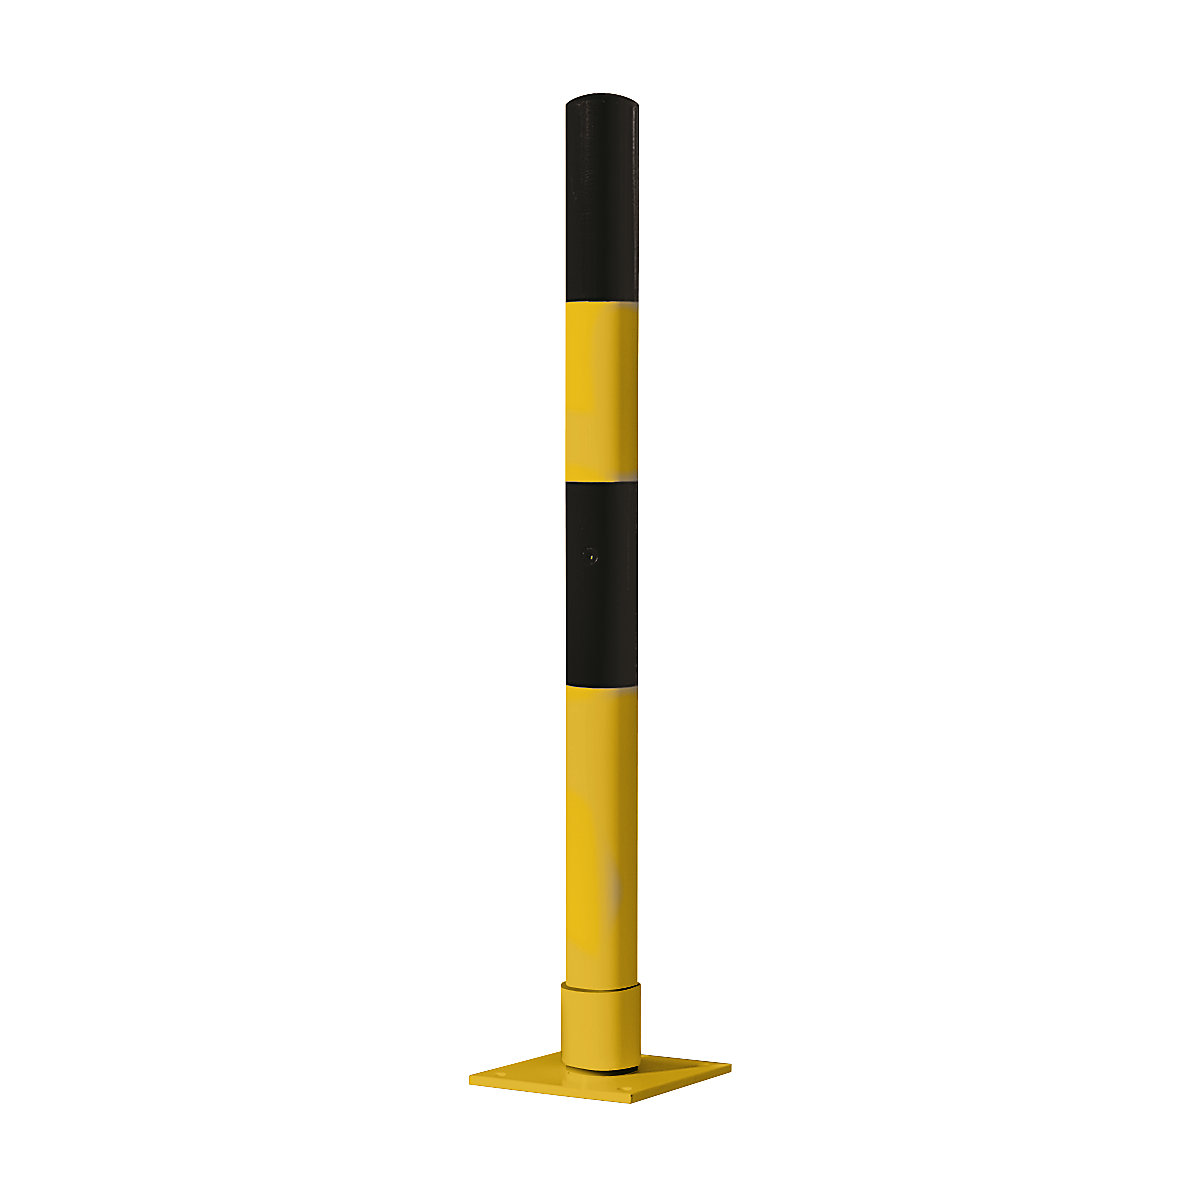 Barrier post made of steel tubing, flexible, Ø 76 mm, for setting in concrete, black / yellow